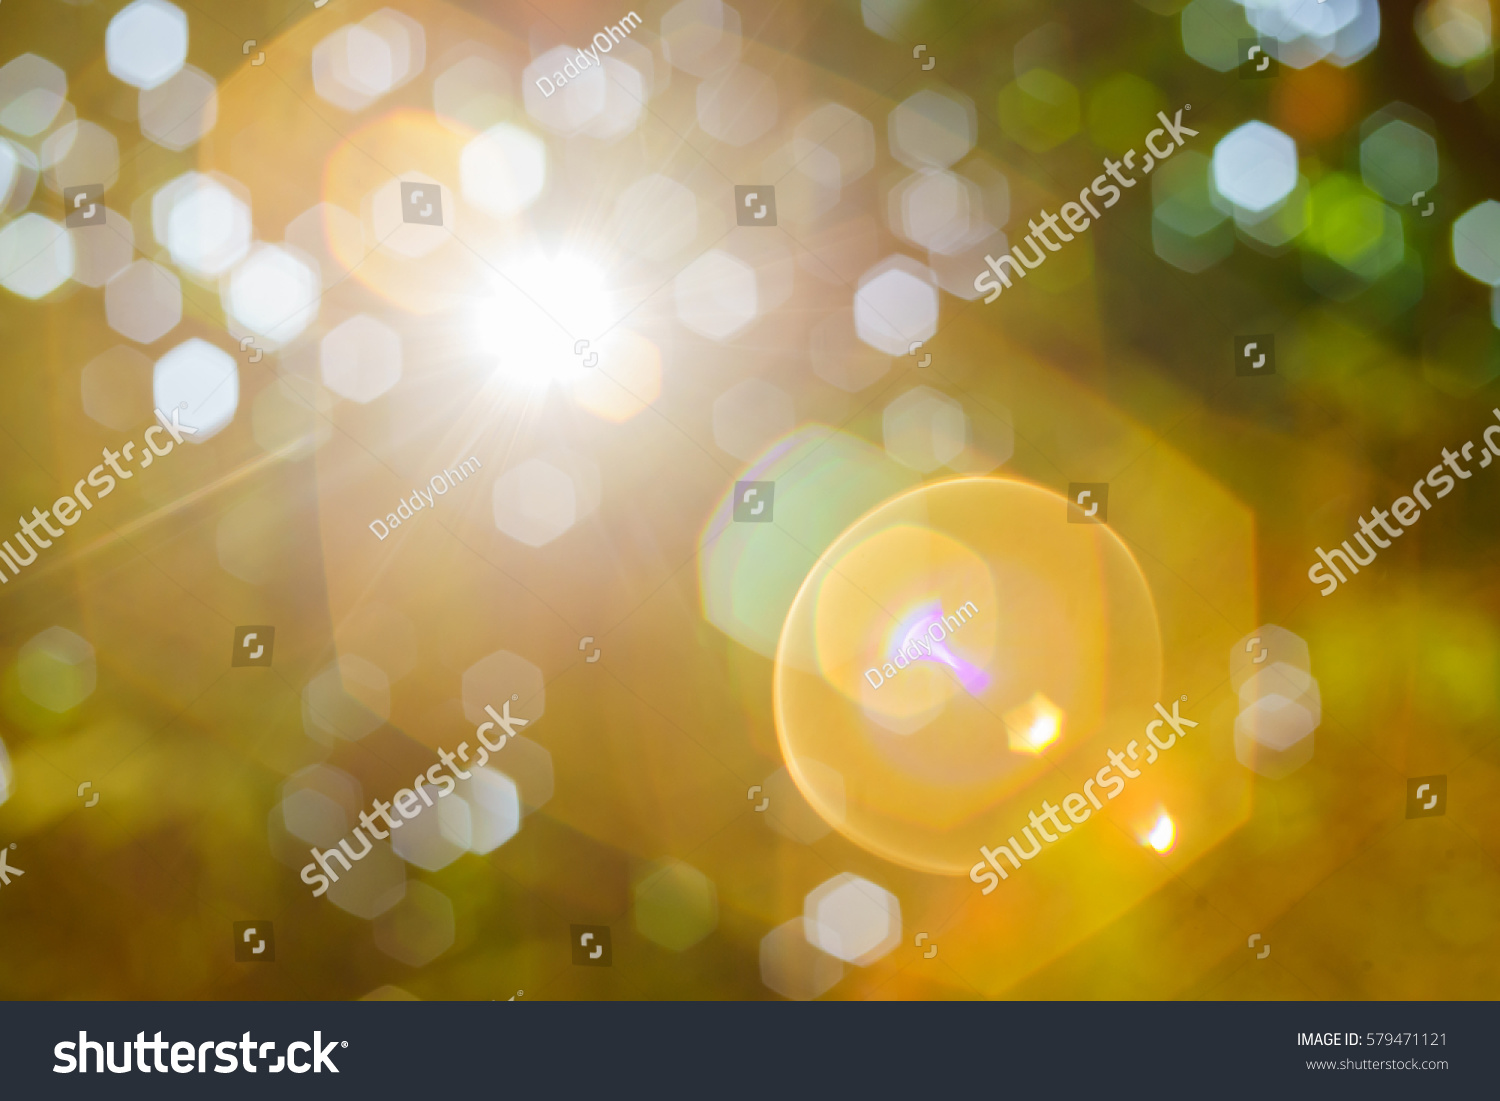 Nature bokeh background and a bright sun light flair. #579471121